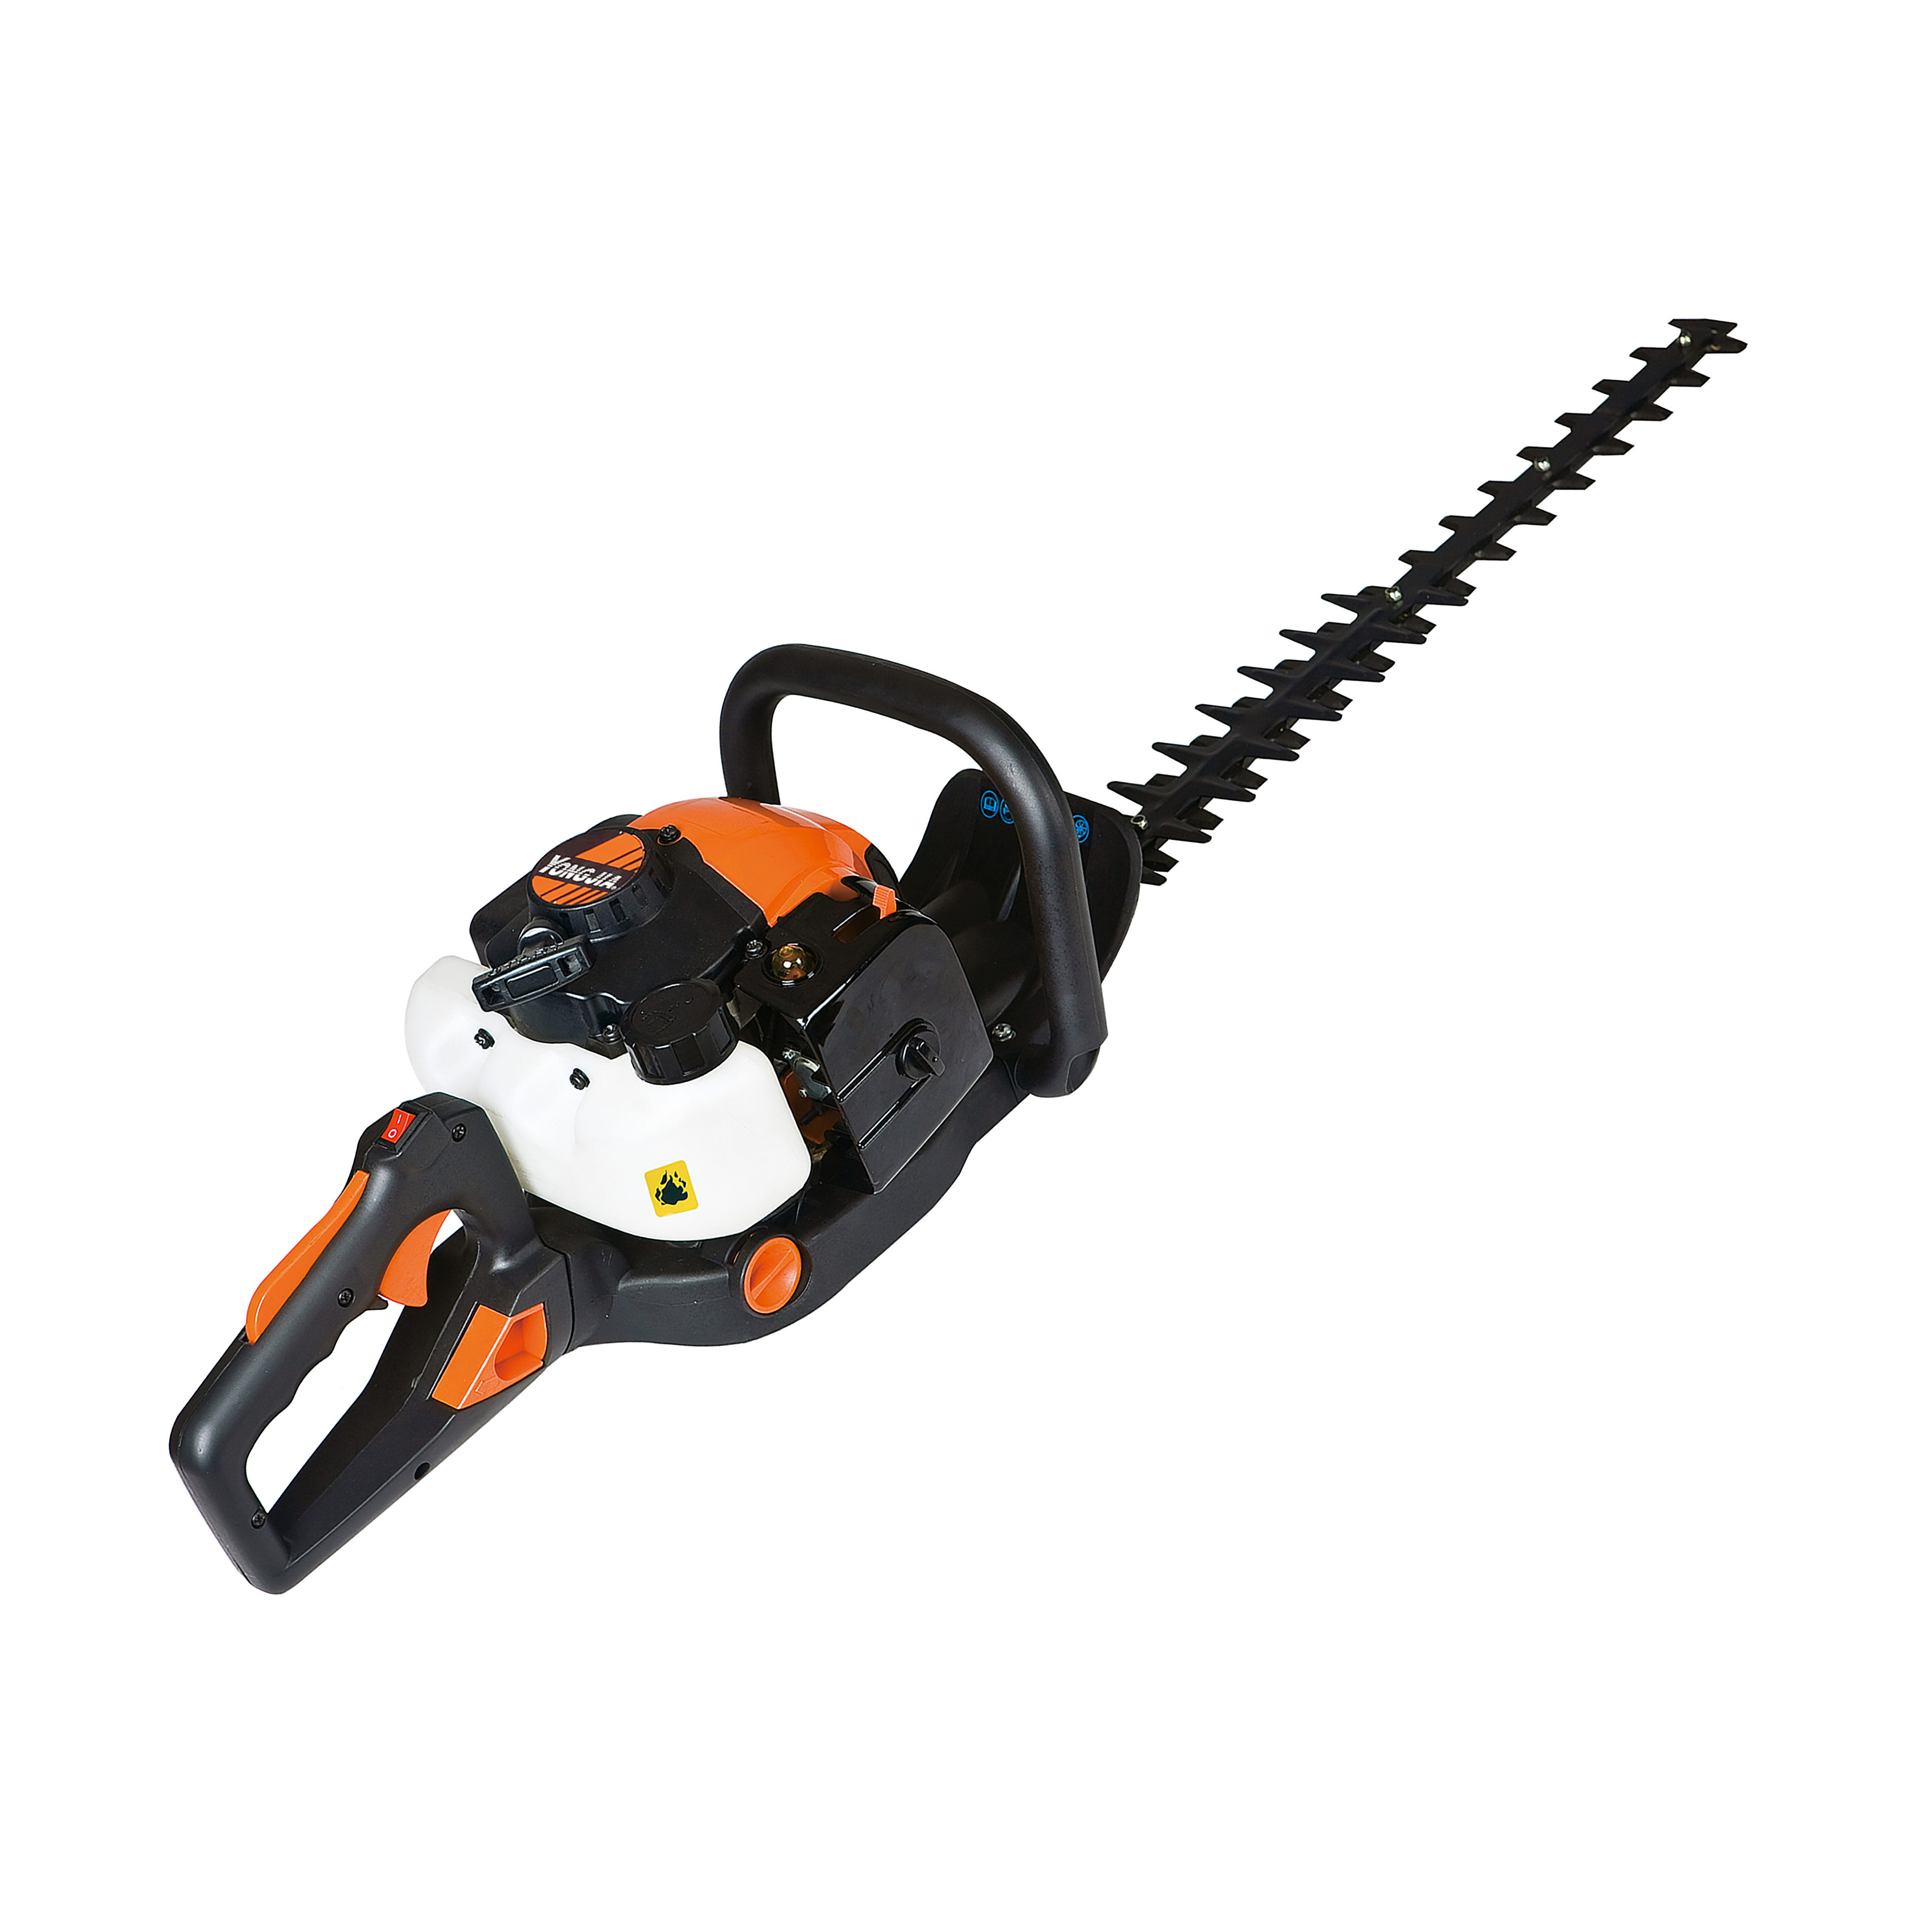 TOPSO NEW MODEL 25.4CC PETROL HEDGE TRIMMER MODEL SLP600E Featured Image